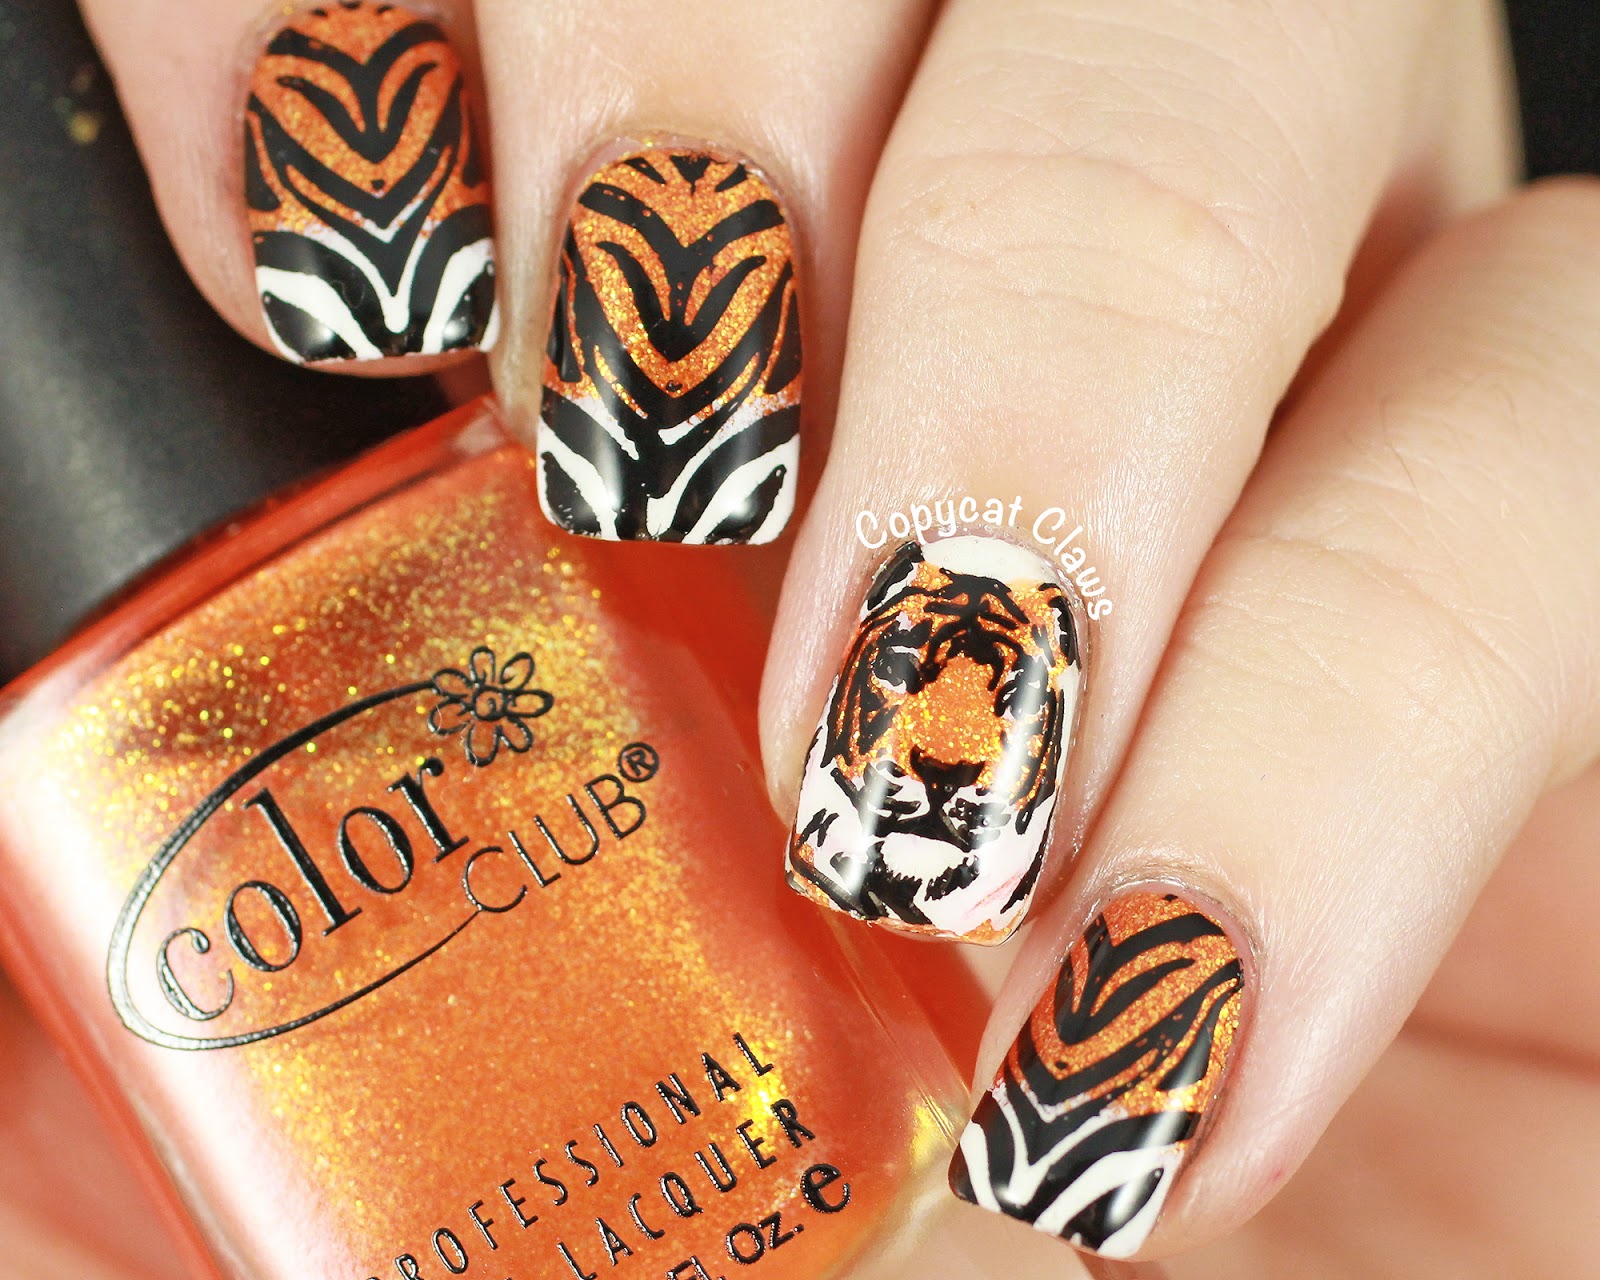 1. Tiger Nail Art Designs: 10 Ideas for Your Next Manicure - wide 2